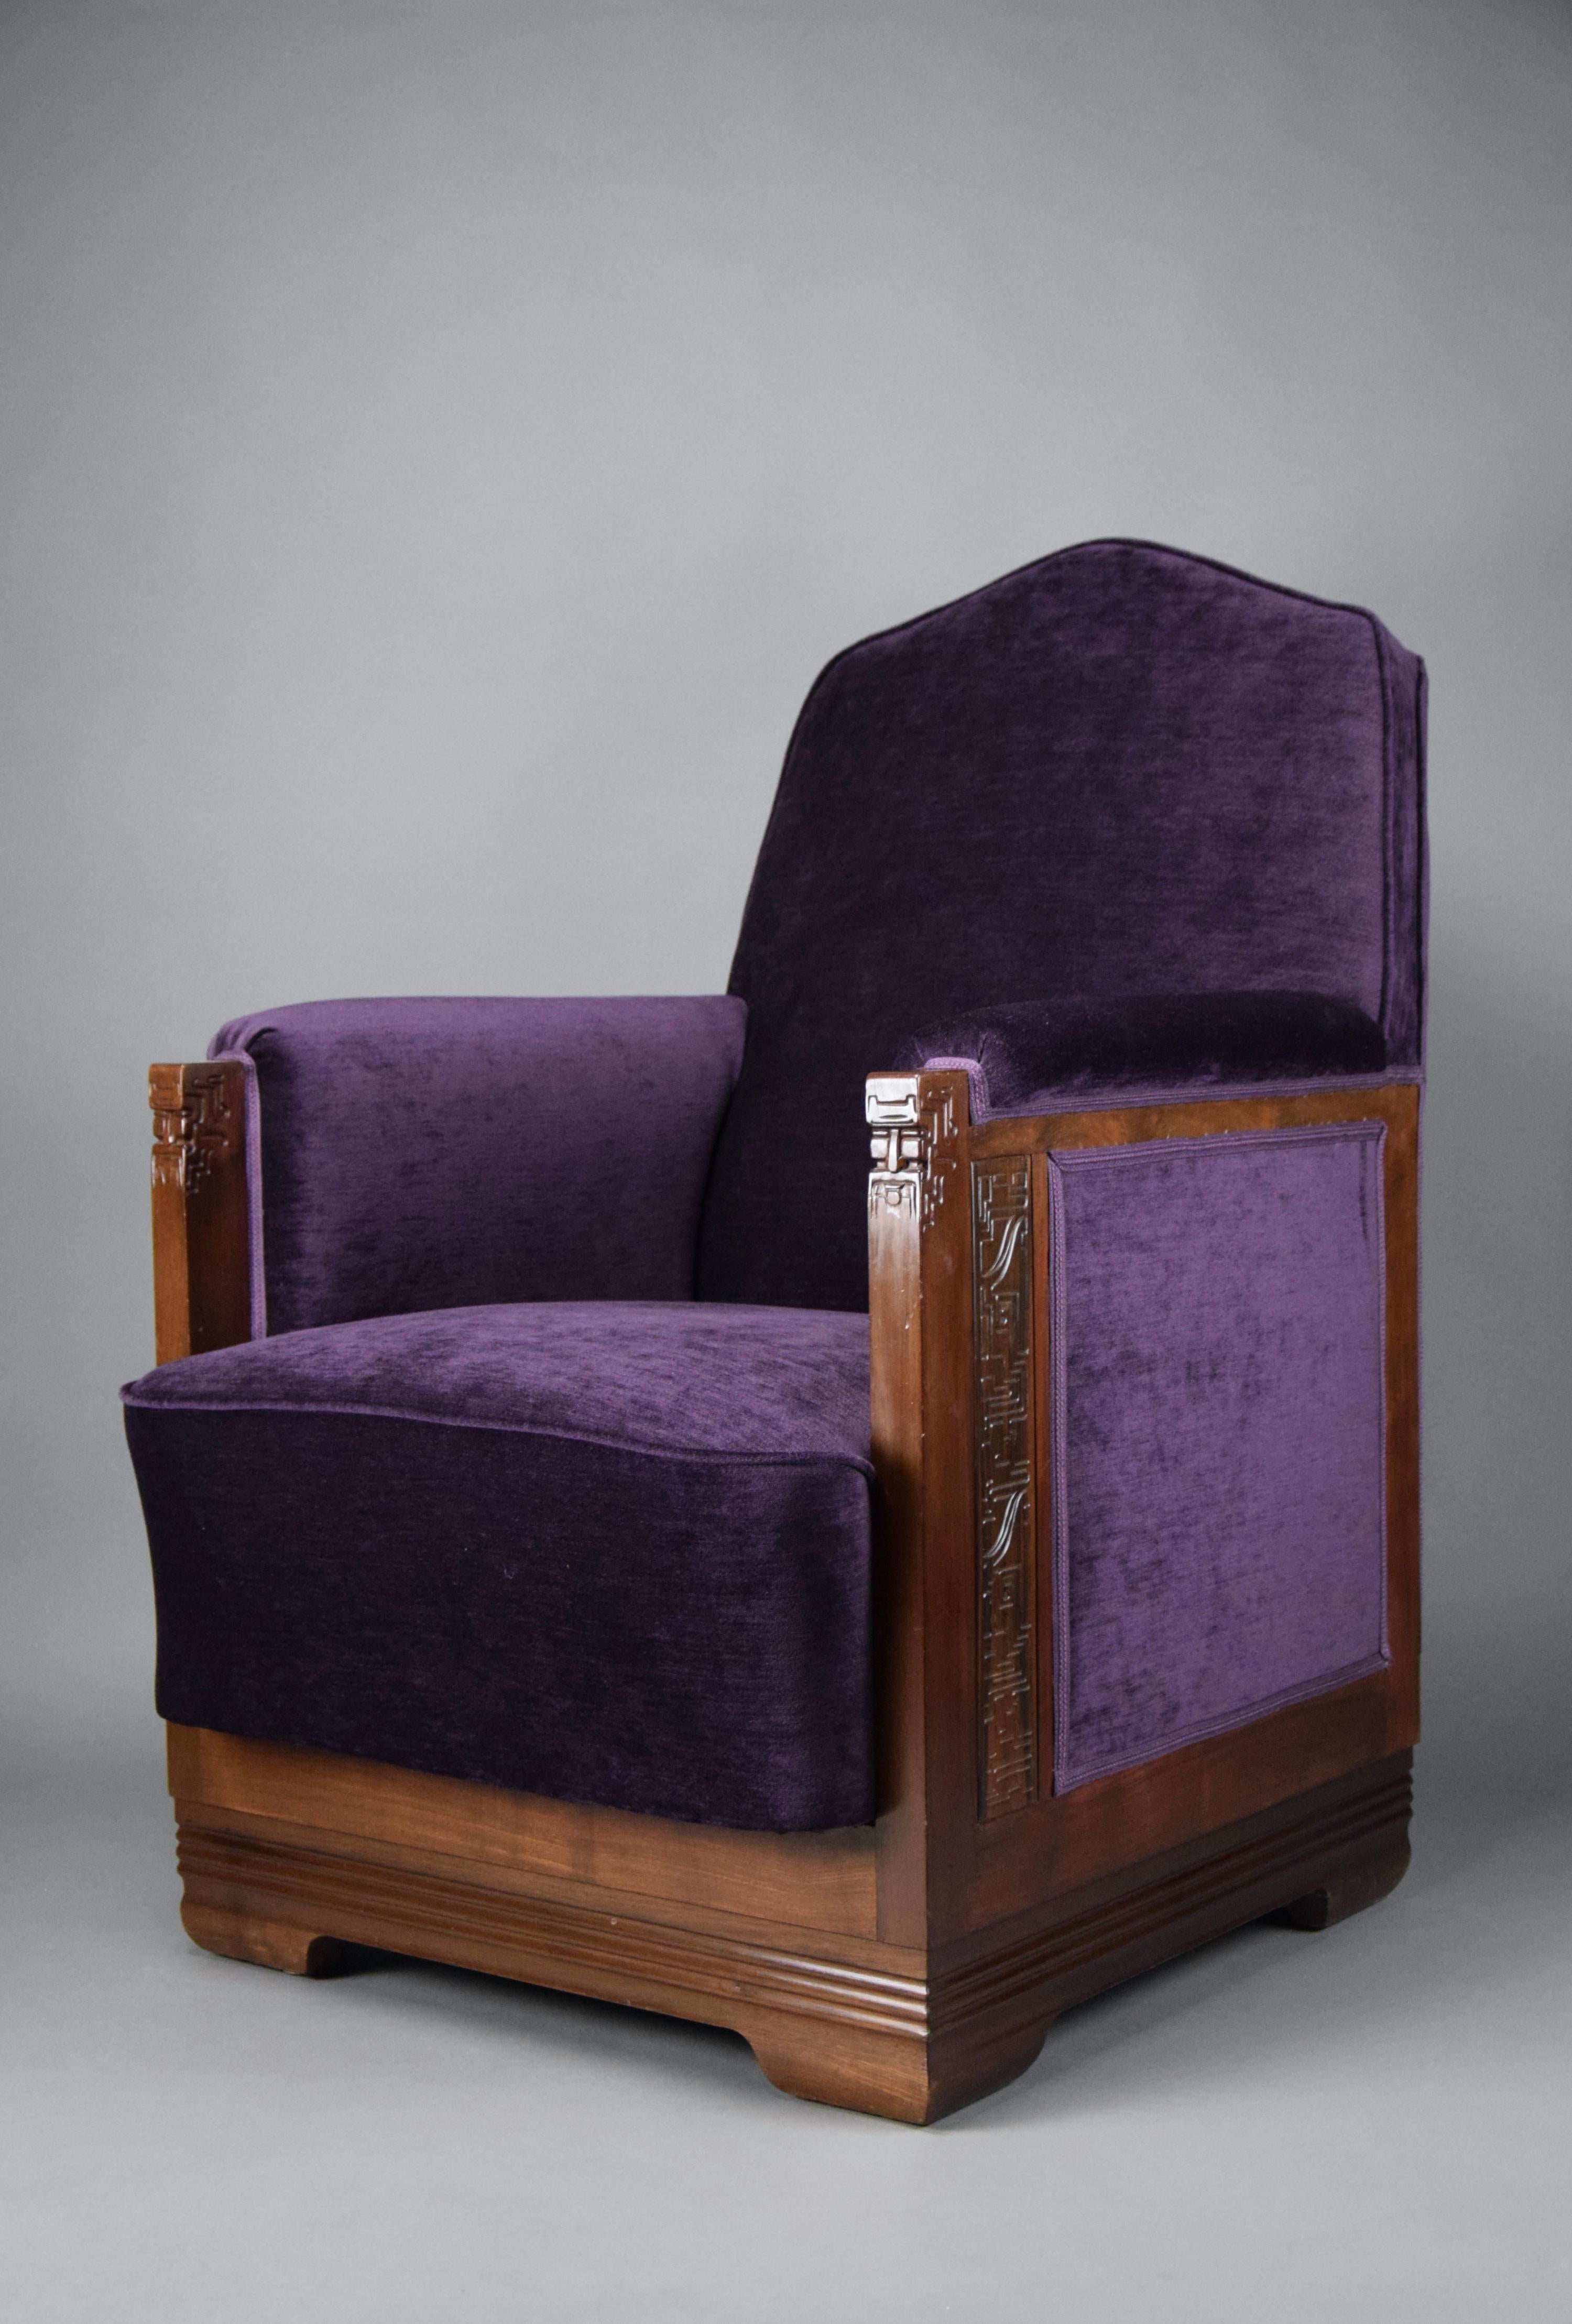 Art Deco Jatoba Wood and Purple Velvet Lounge Chair In Good Condition For Sale In Weesp, NL